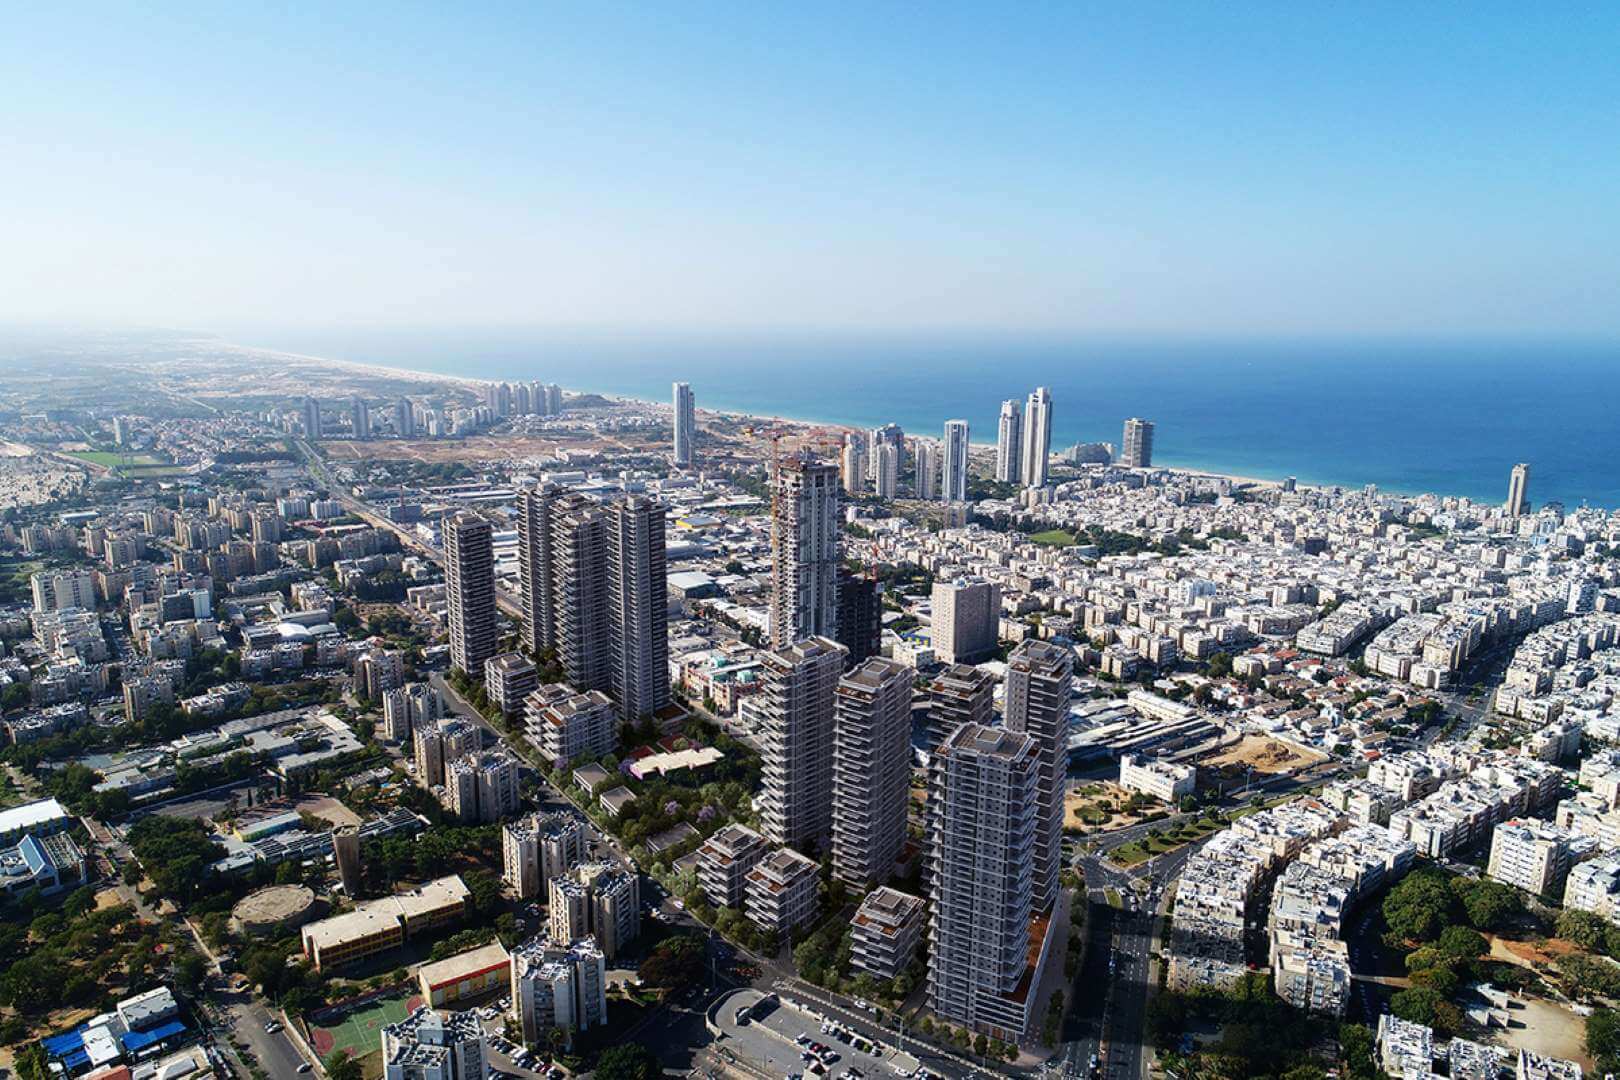 Photo of buildings from the green UNIK project in Bat Yam